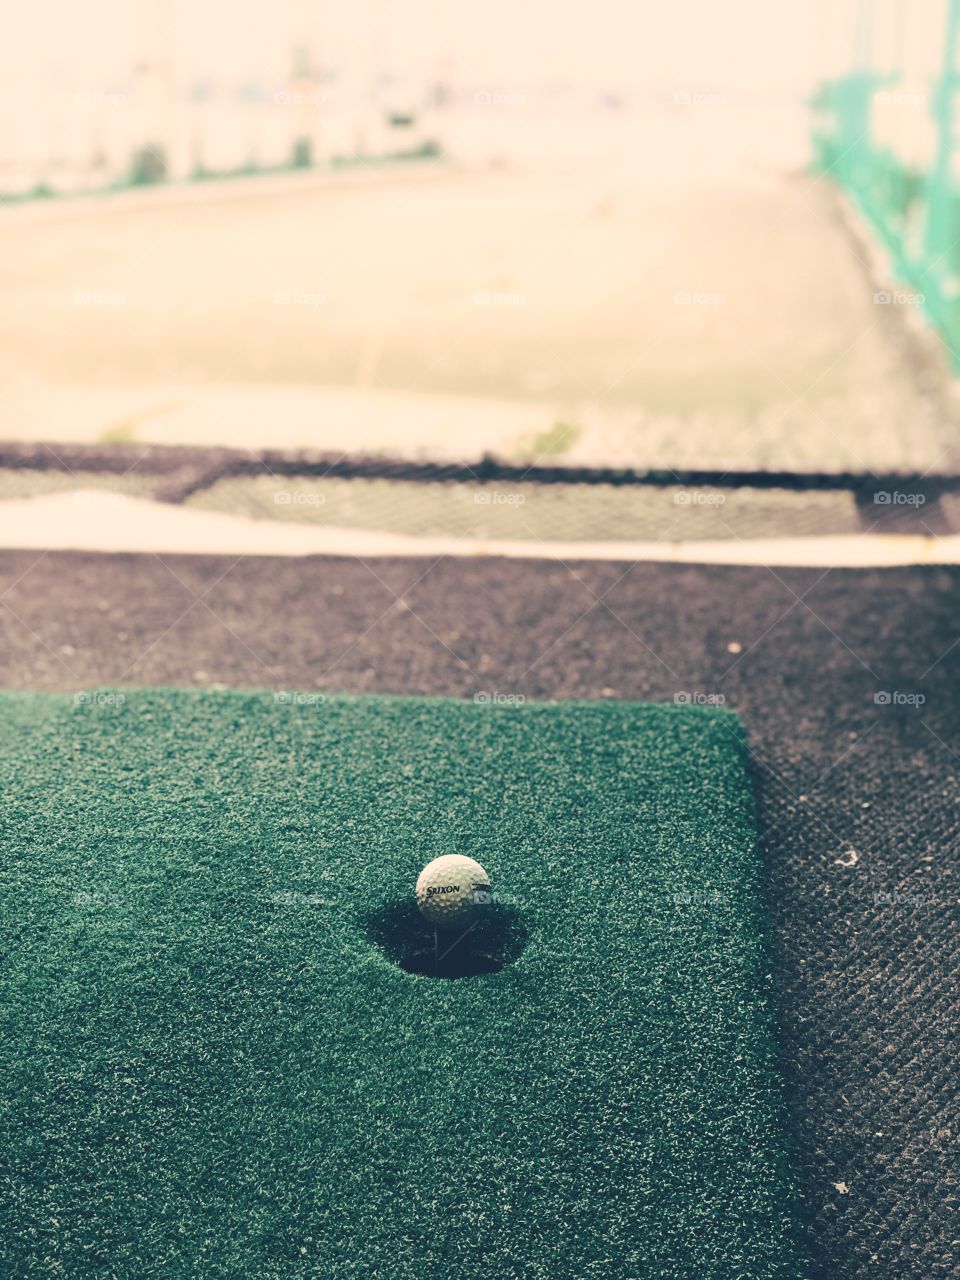 Golf Ball On A Driving Range, Chelsea Piers Driving Range NYC Photograph 